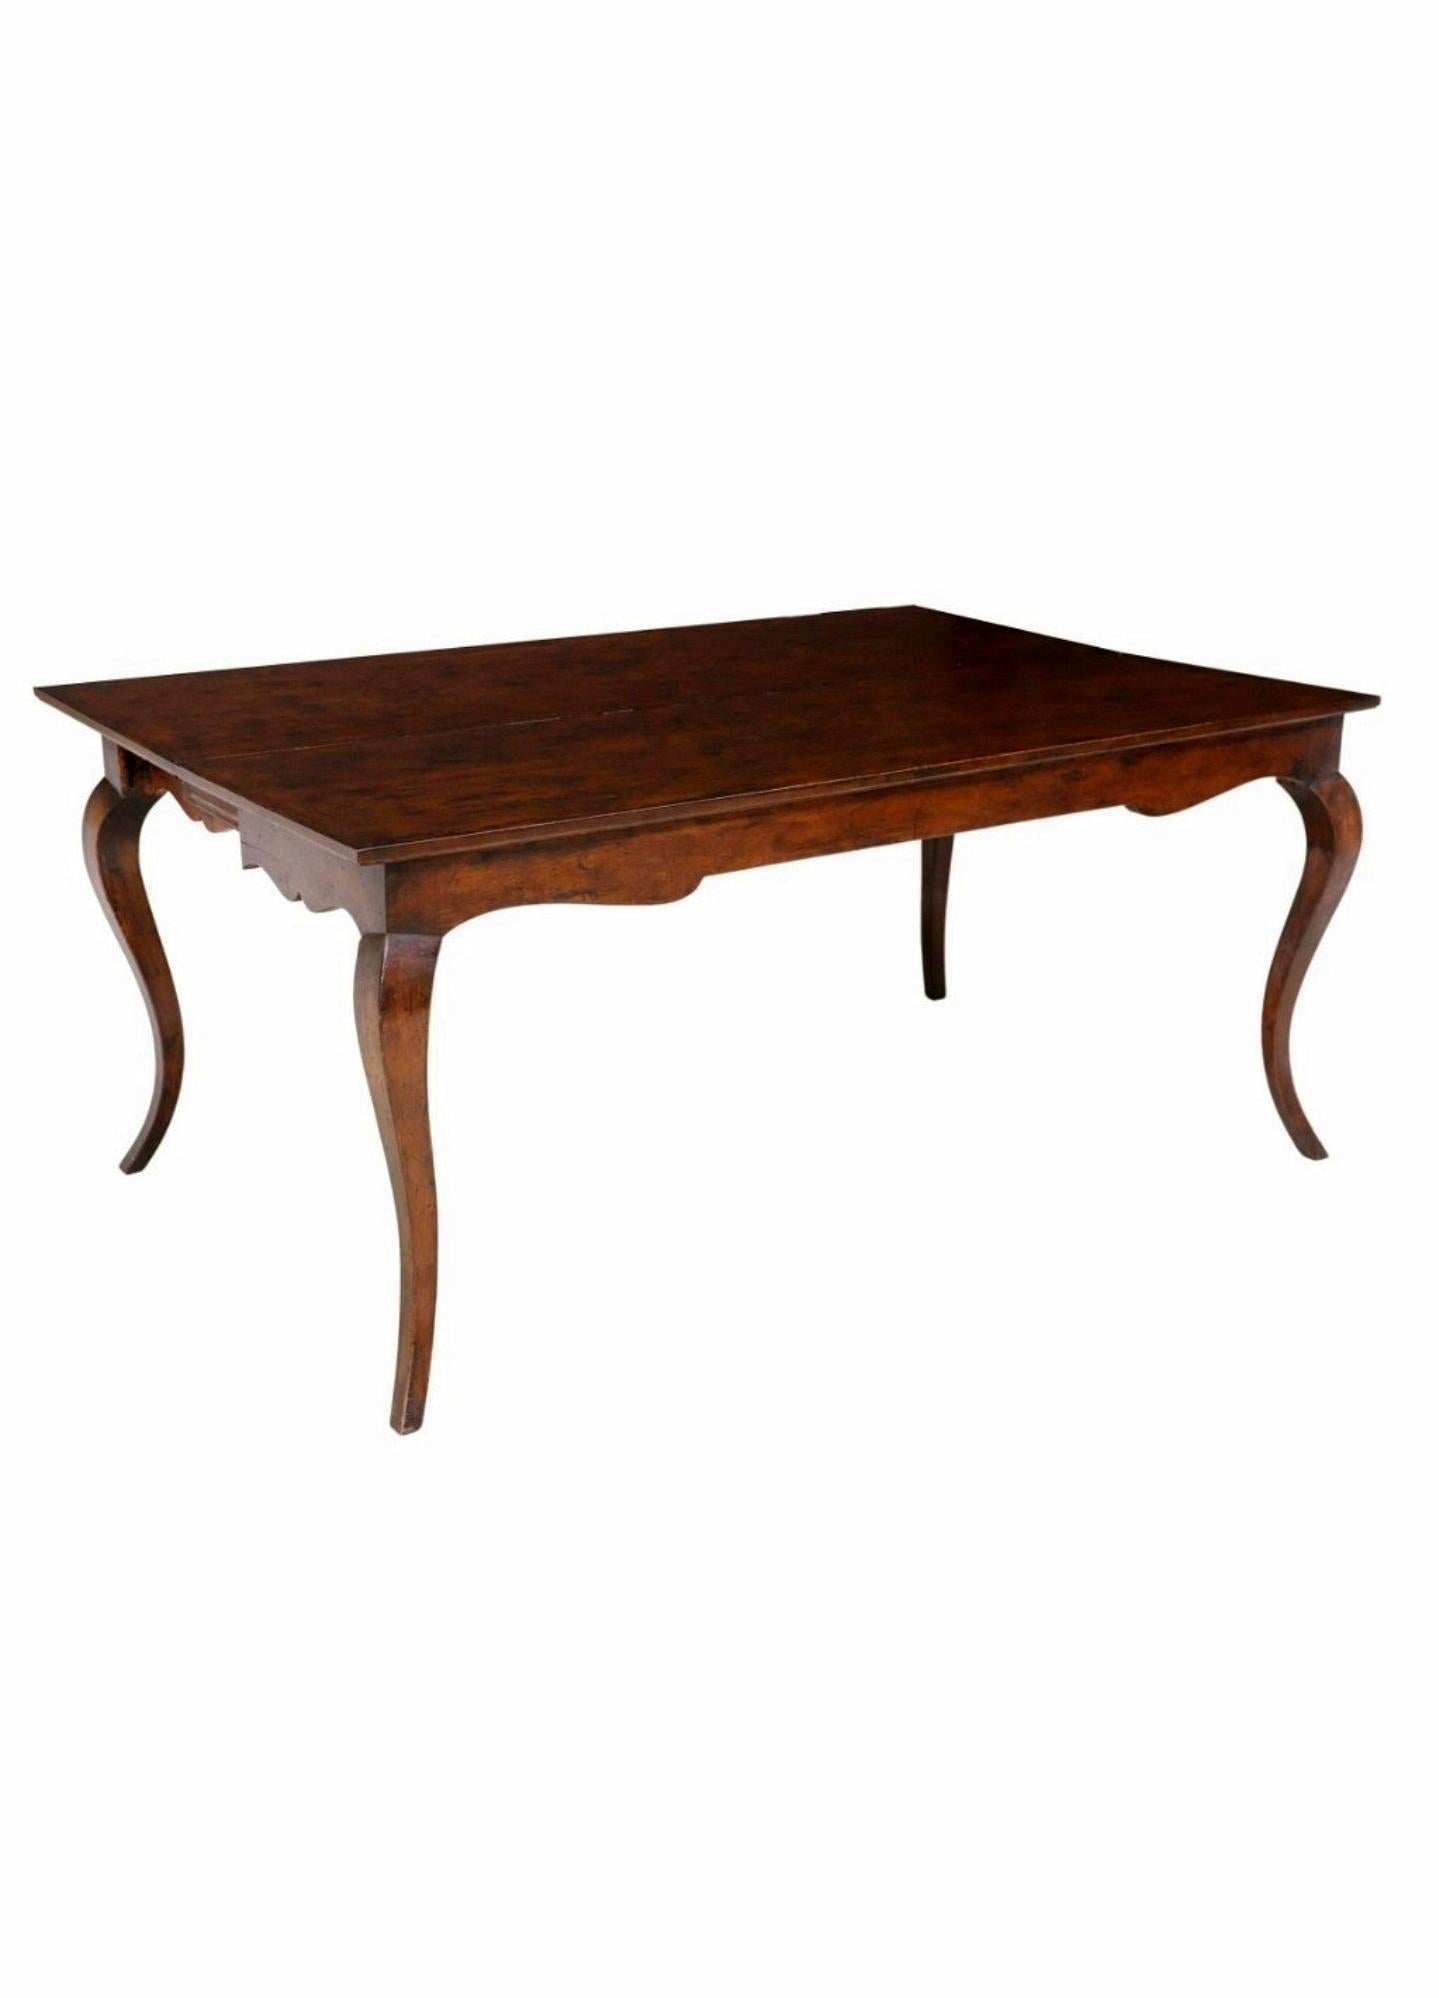 19th Century French Provincial Louis XV Style Flip-top Farmhouse Kitchen Table For Sale 6